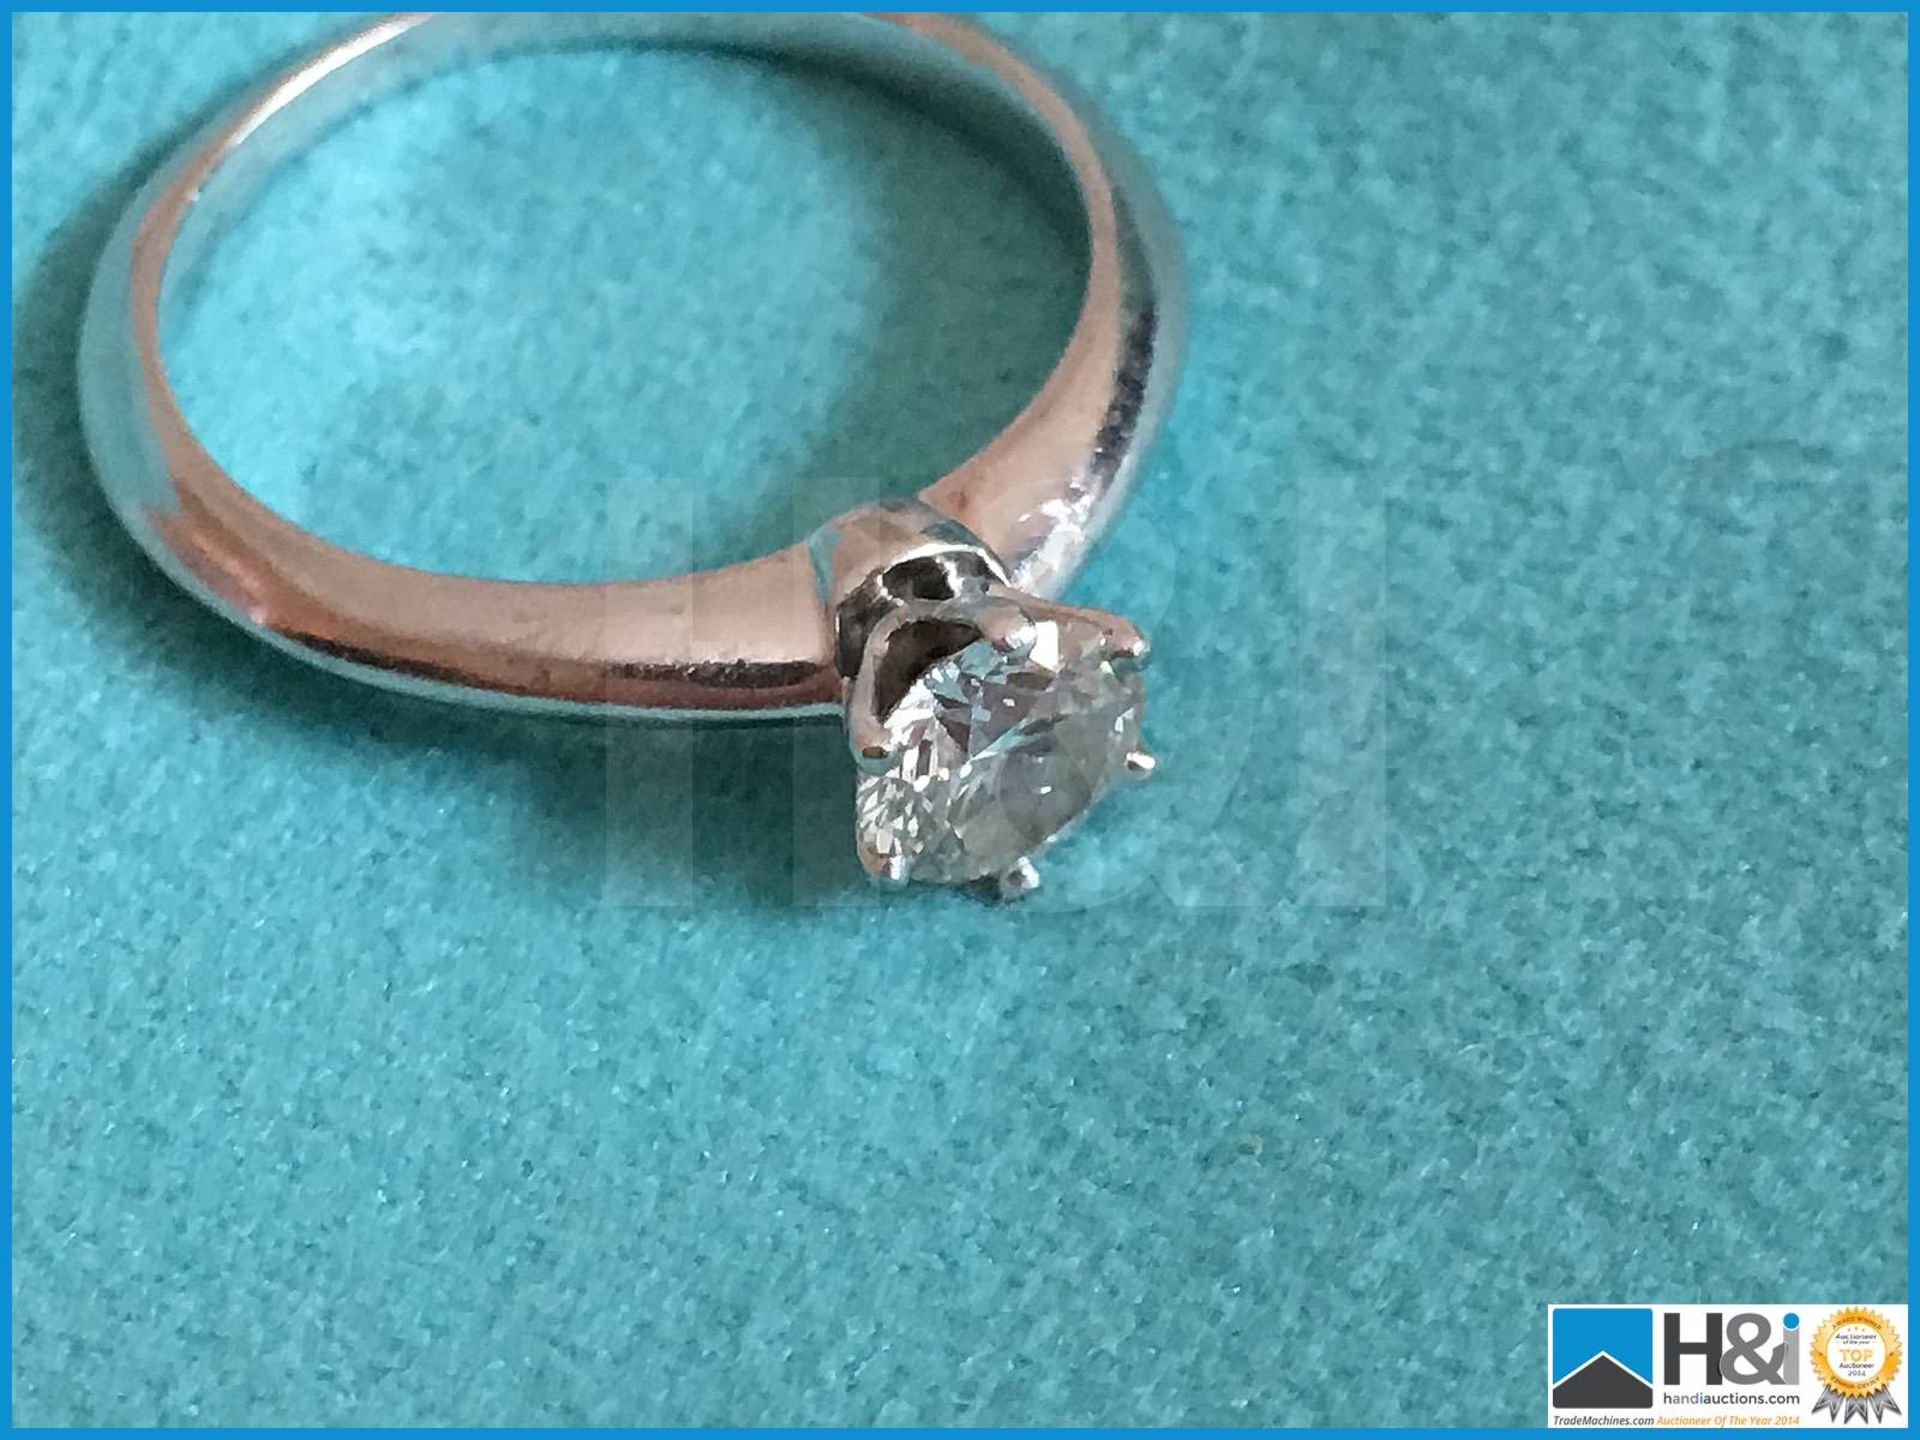 Genuine Tiffany classic iconic engagement ring in Platinum with 0.75 Carat Diamond purchased from Ti - Image 8 of 8